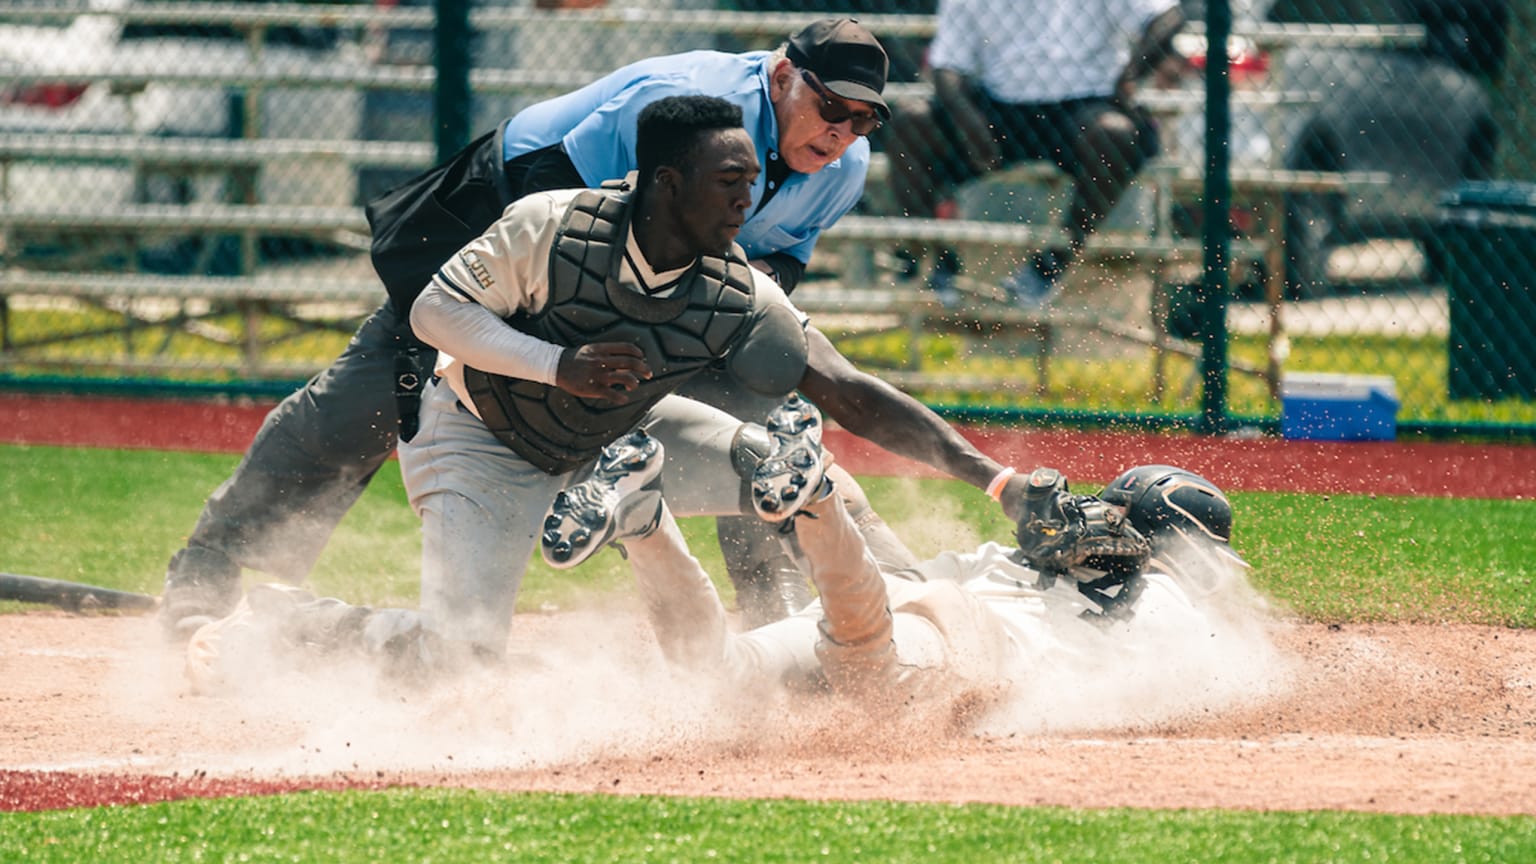 A catcher tags a runner sliding home in a cloud of dust as an umpire leans in for a good look